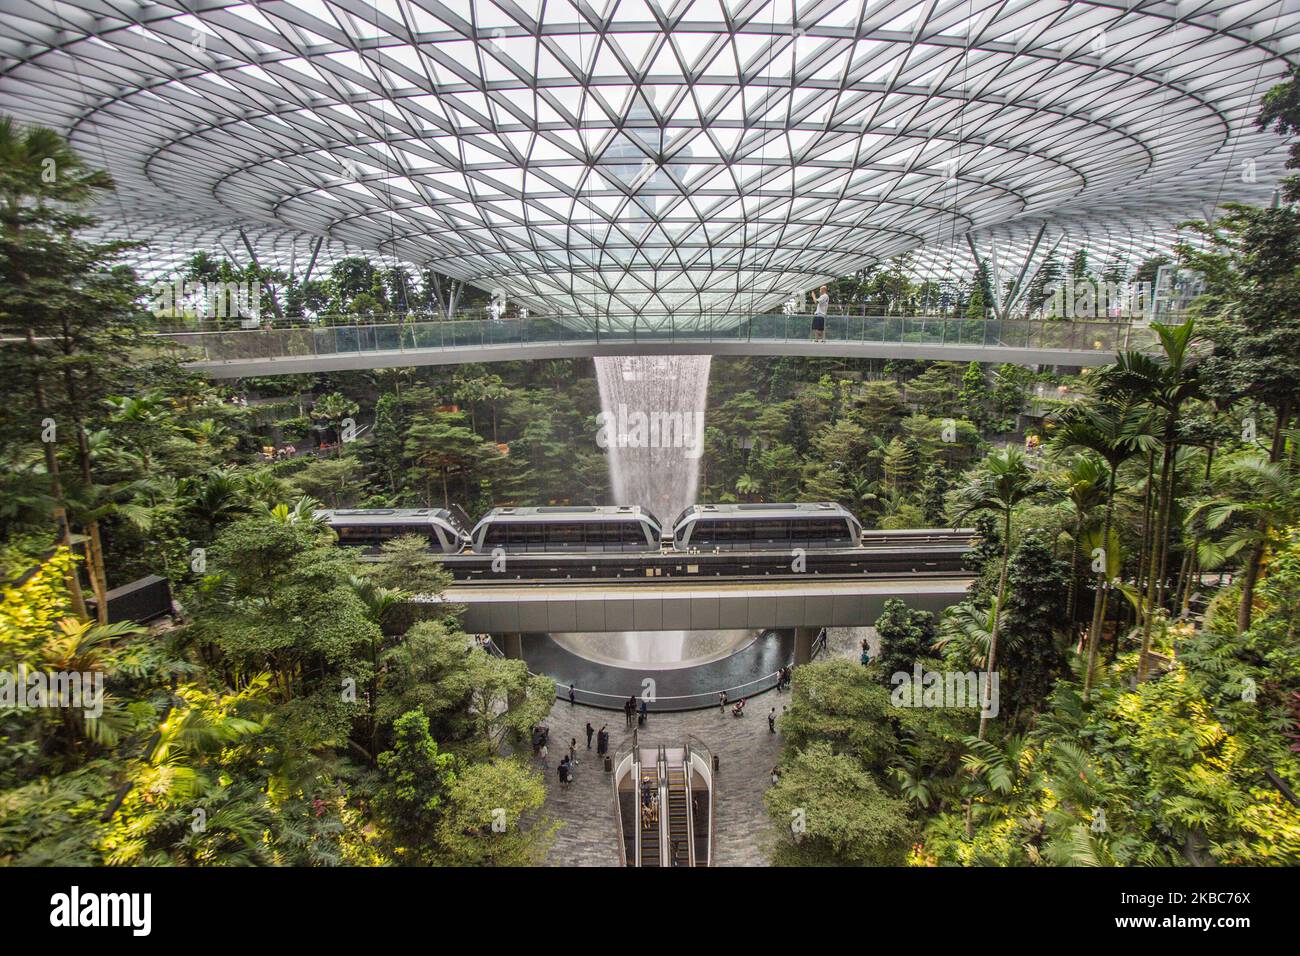 Inside Singapore's Changi Airport: Jewel, a rainforest with a 40